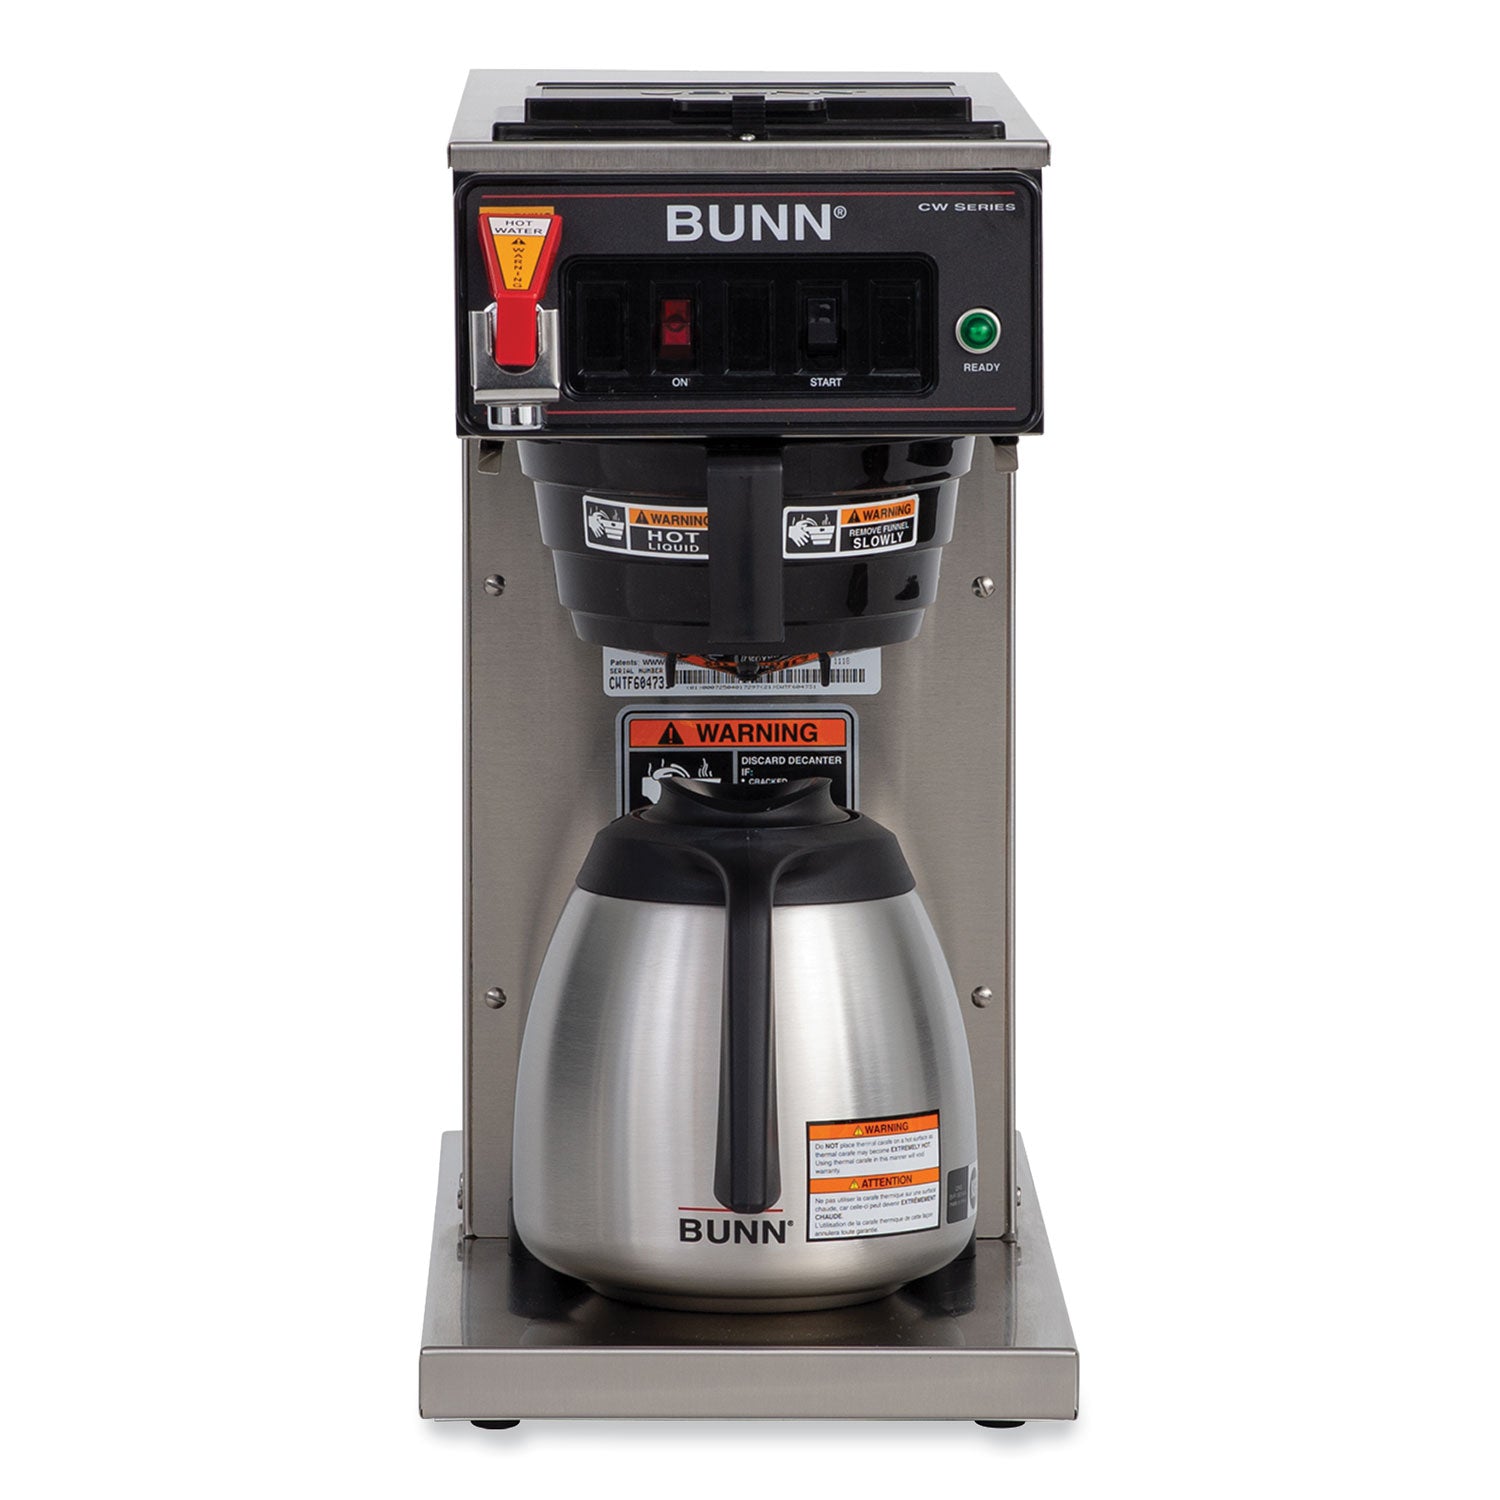 cwtf15-tc-12-cup-automatic-thermal-coffee-brewer-gray-stainless-steel-ships-in-7-10-business-days_bun129500360 - 2